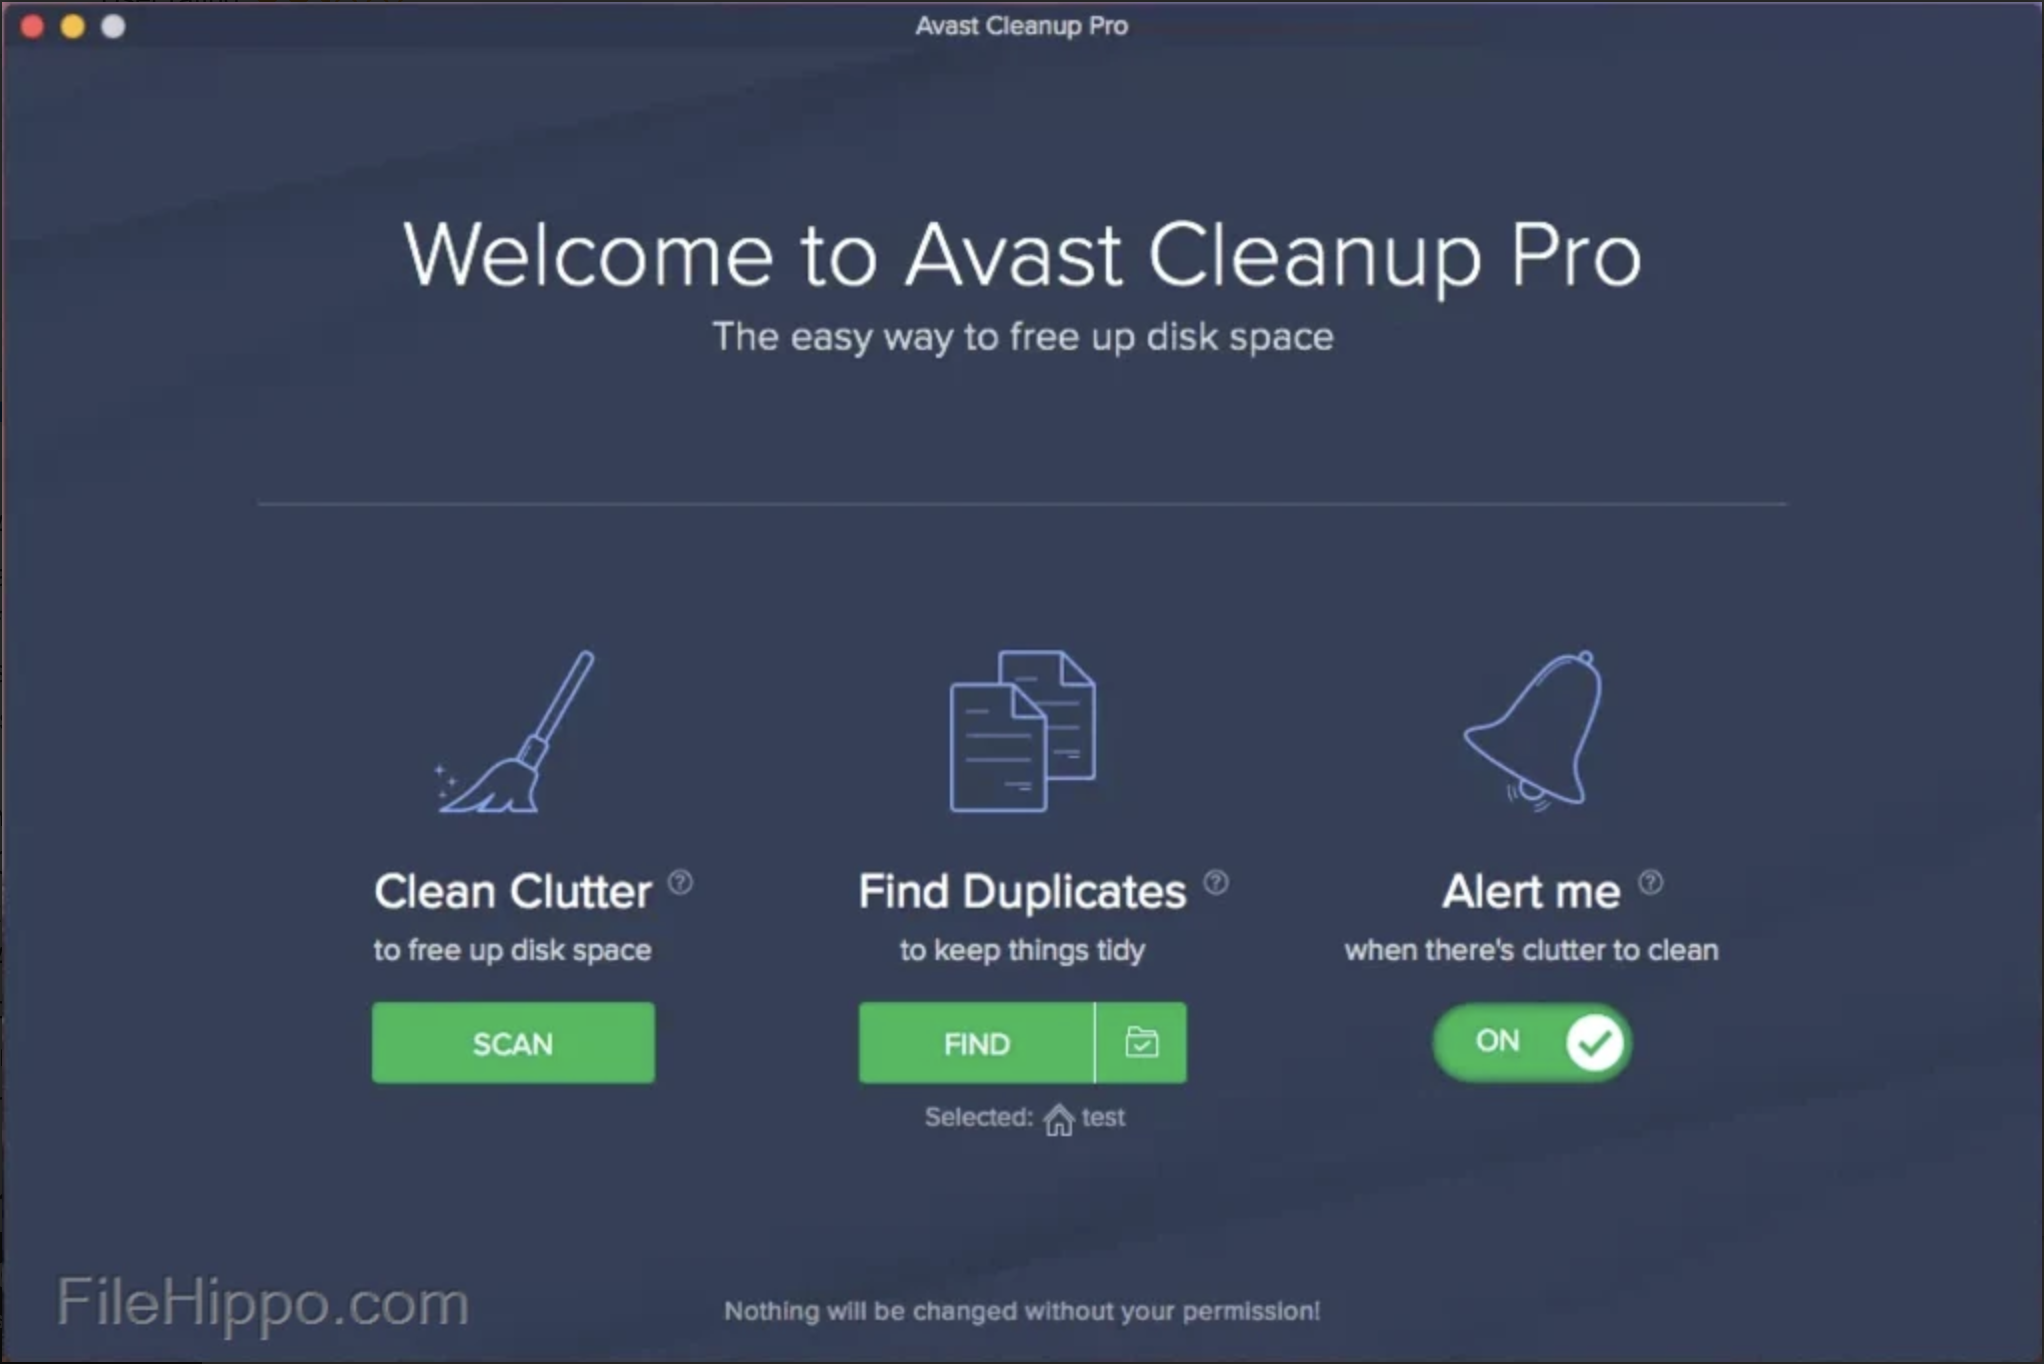 avast browser cleanup run as administrator